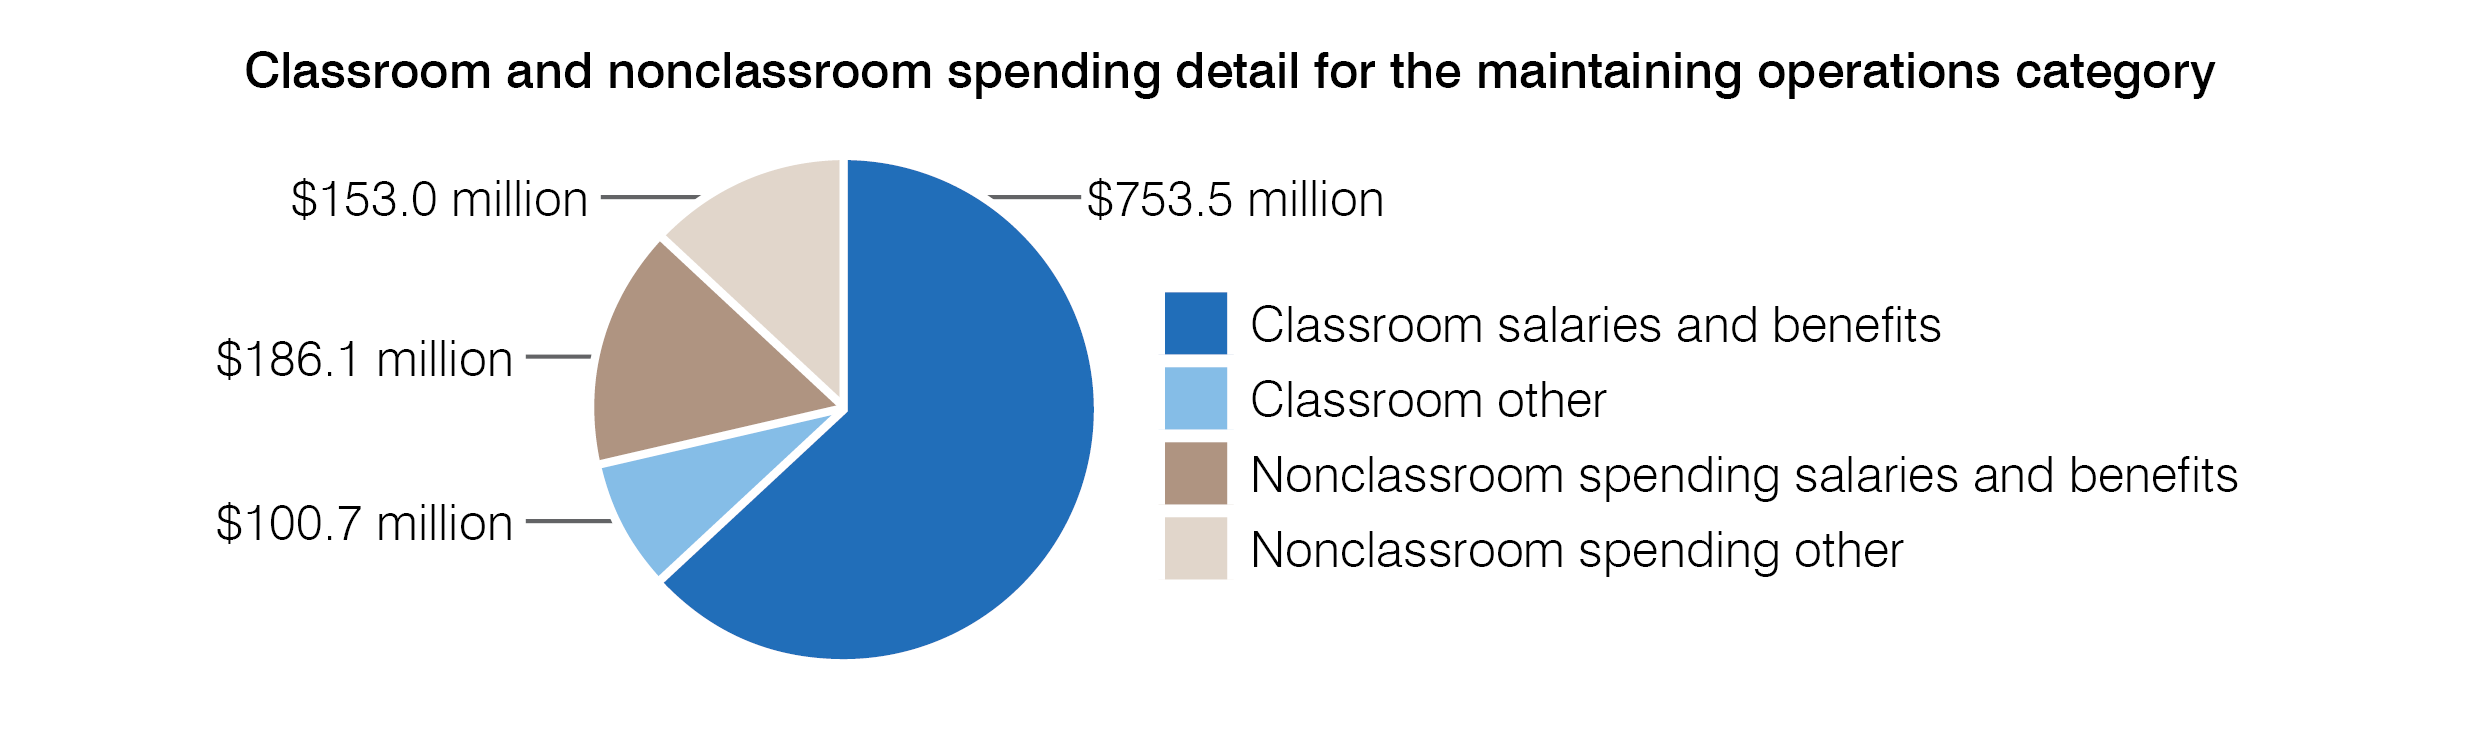 Pie Chart (Classroom and nonclassroom spending detail for the maintaining operations category)